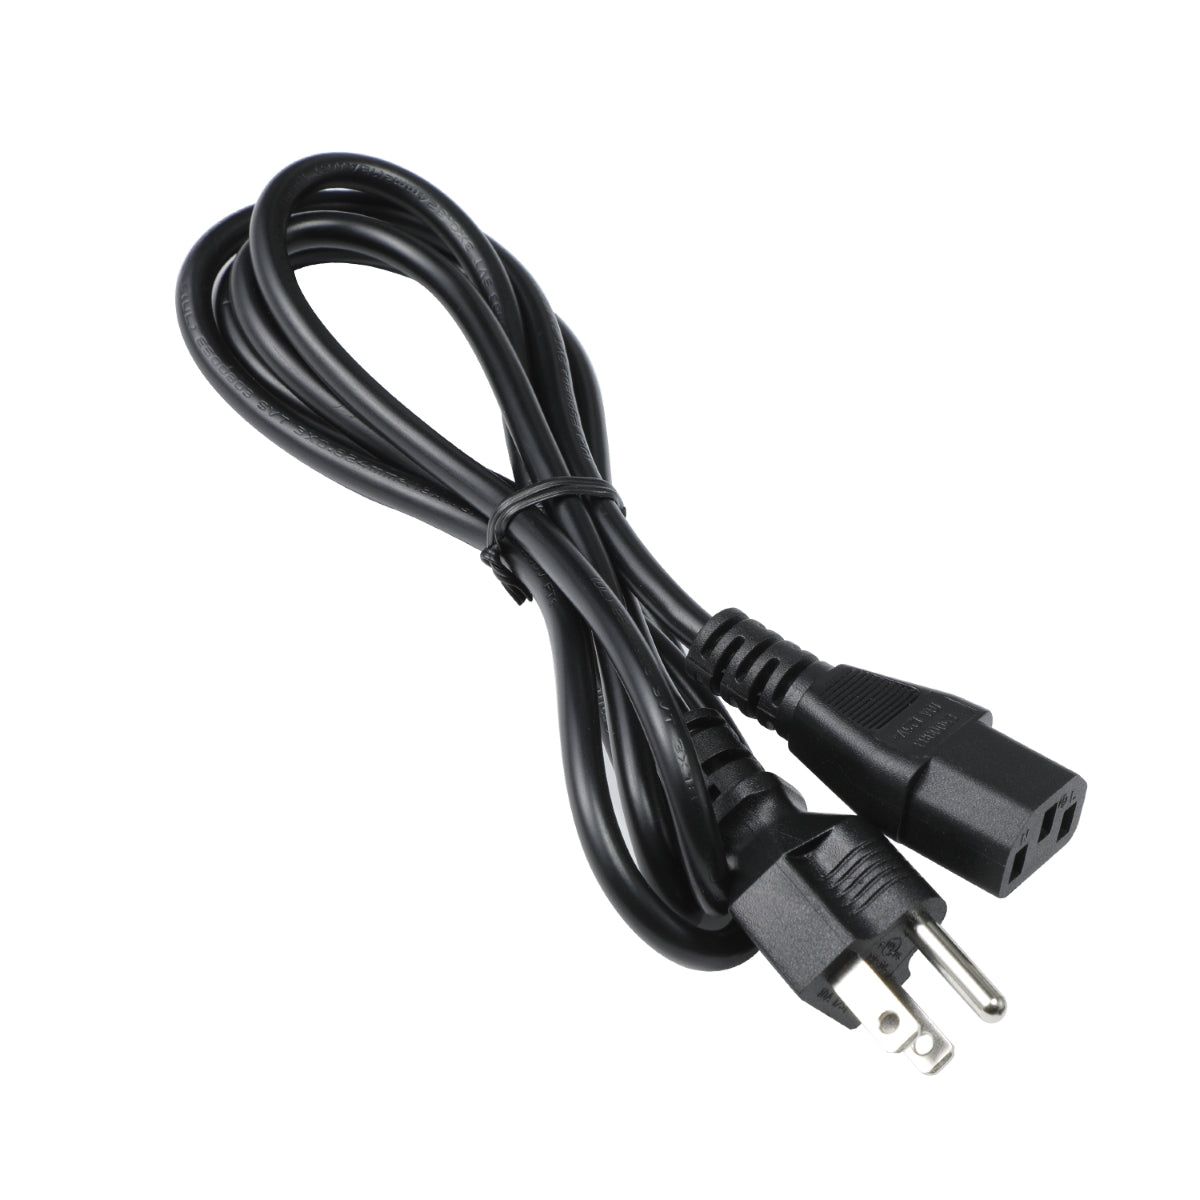 Power Cable for Philips 558M1RY 4K Display.